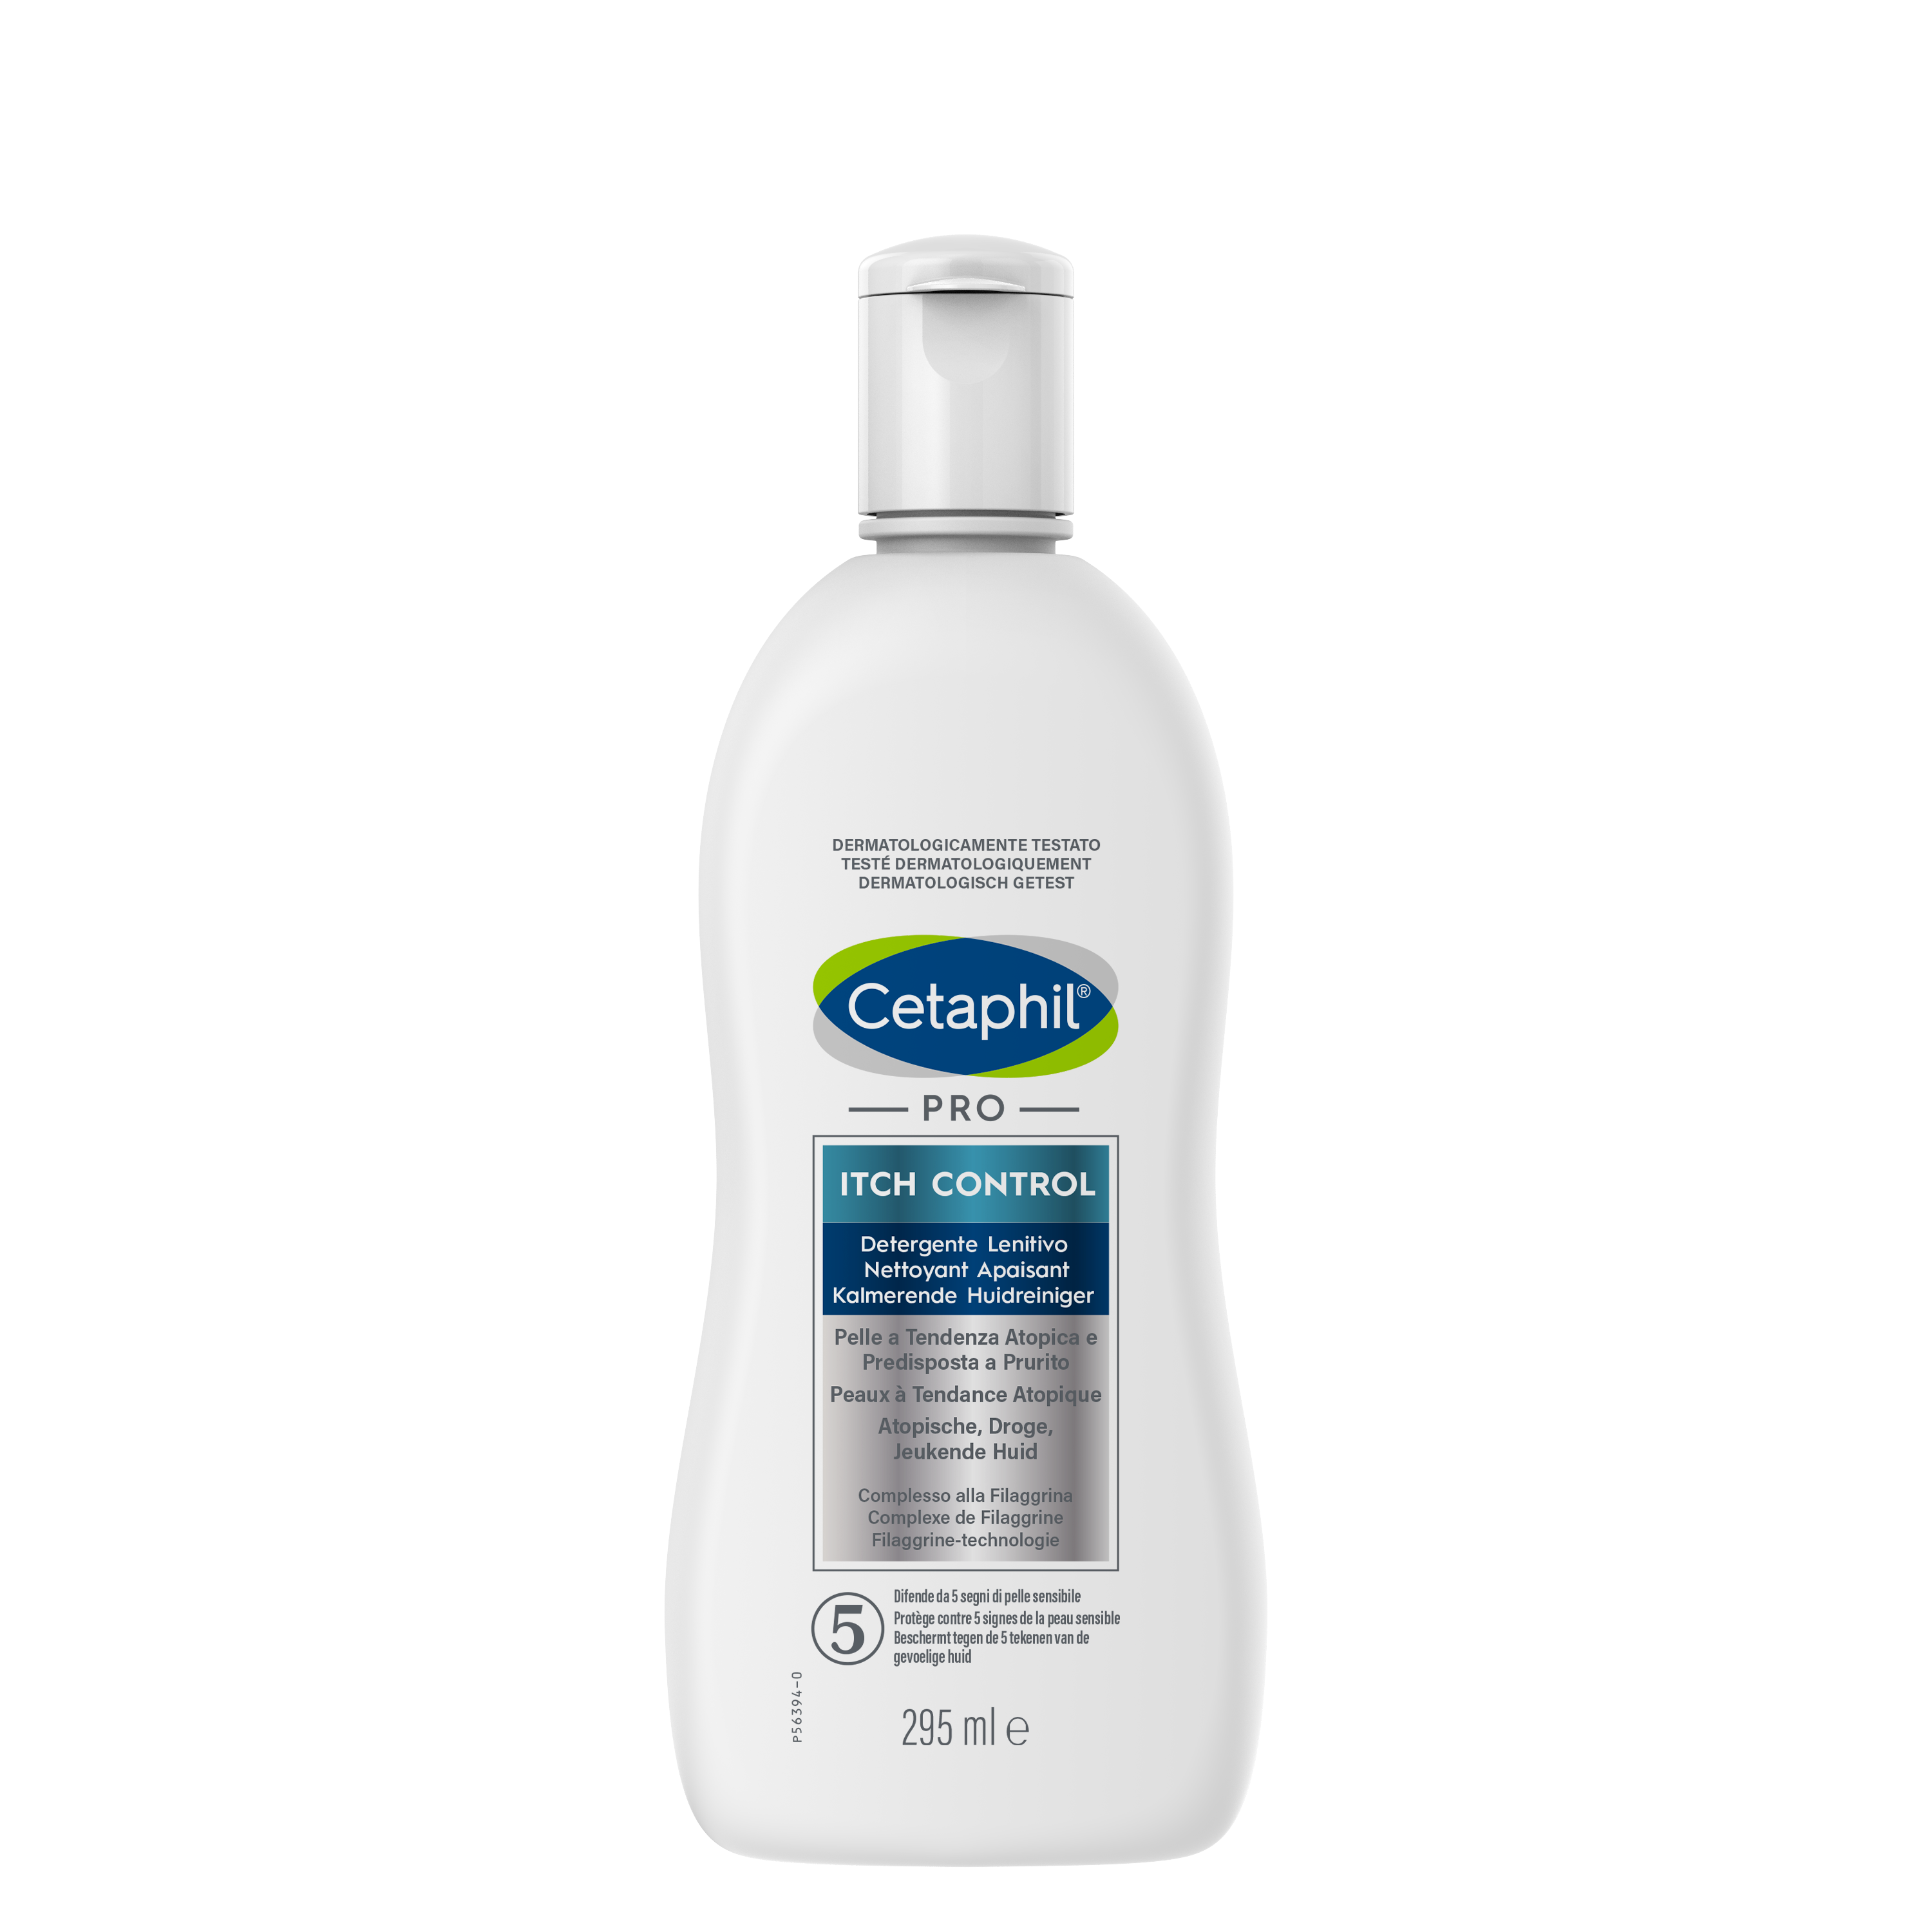 Pro Itch Control Nettoyant Apaisant